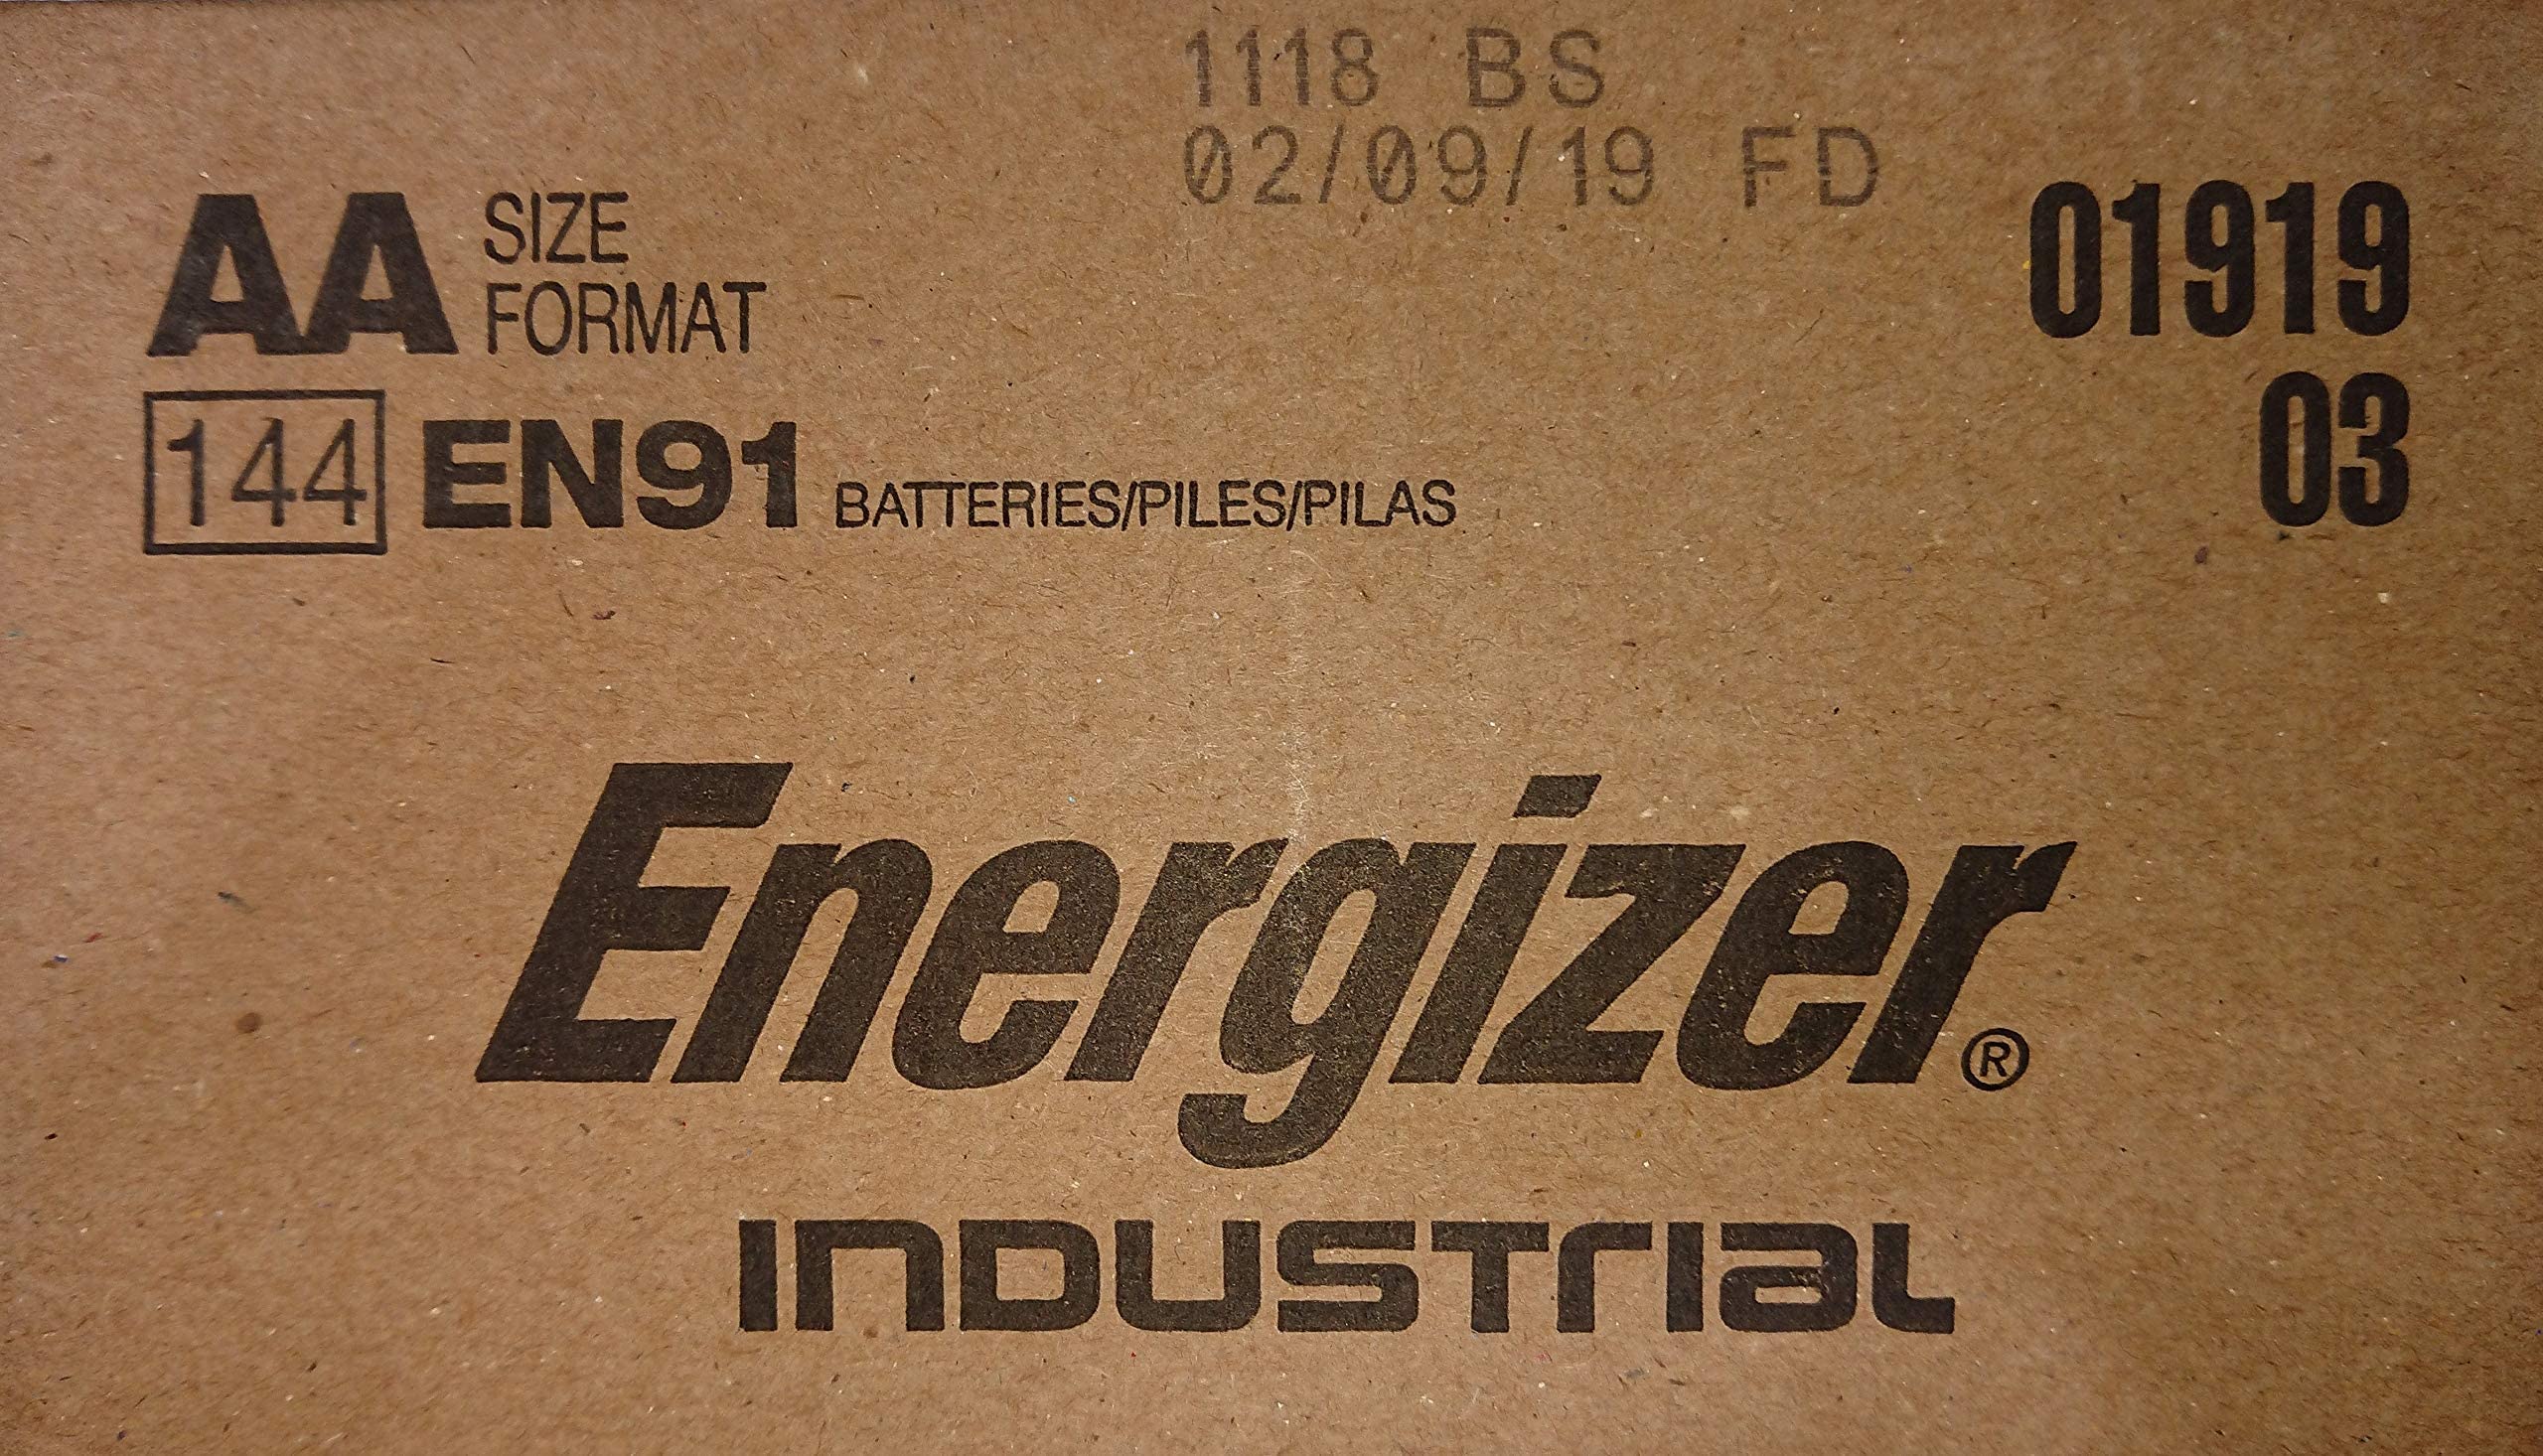 Energizer EN91 Industrial Alkaline Batteries, AA (Box of 144 Batteries) - Made in The USA or Singapore